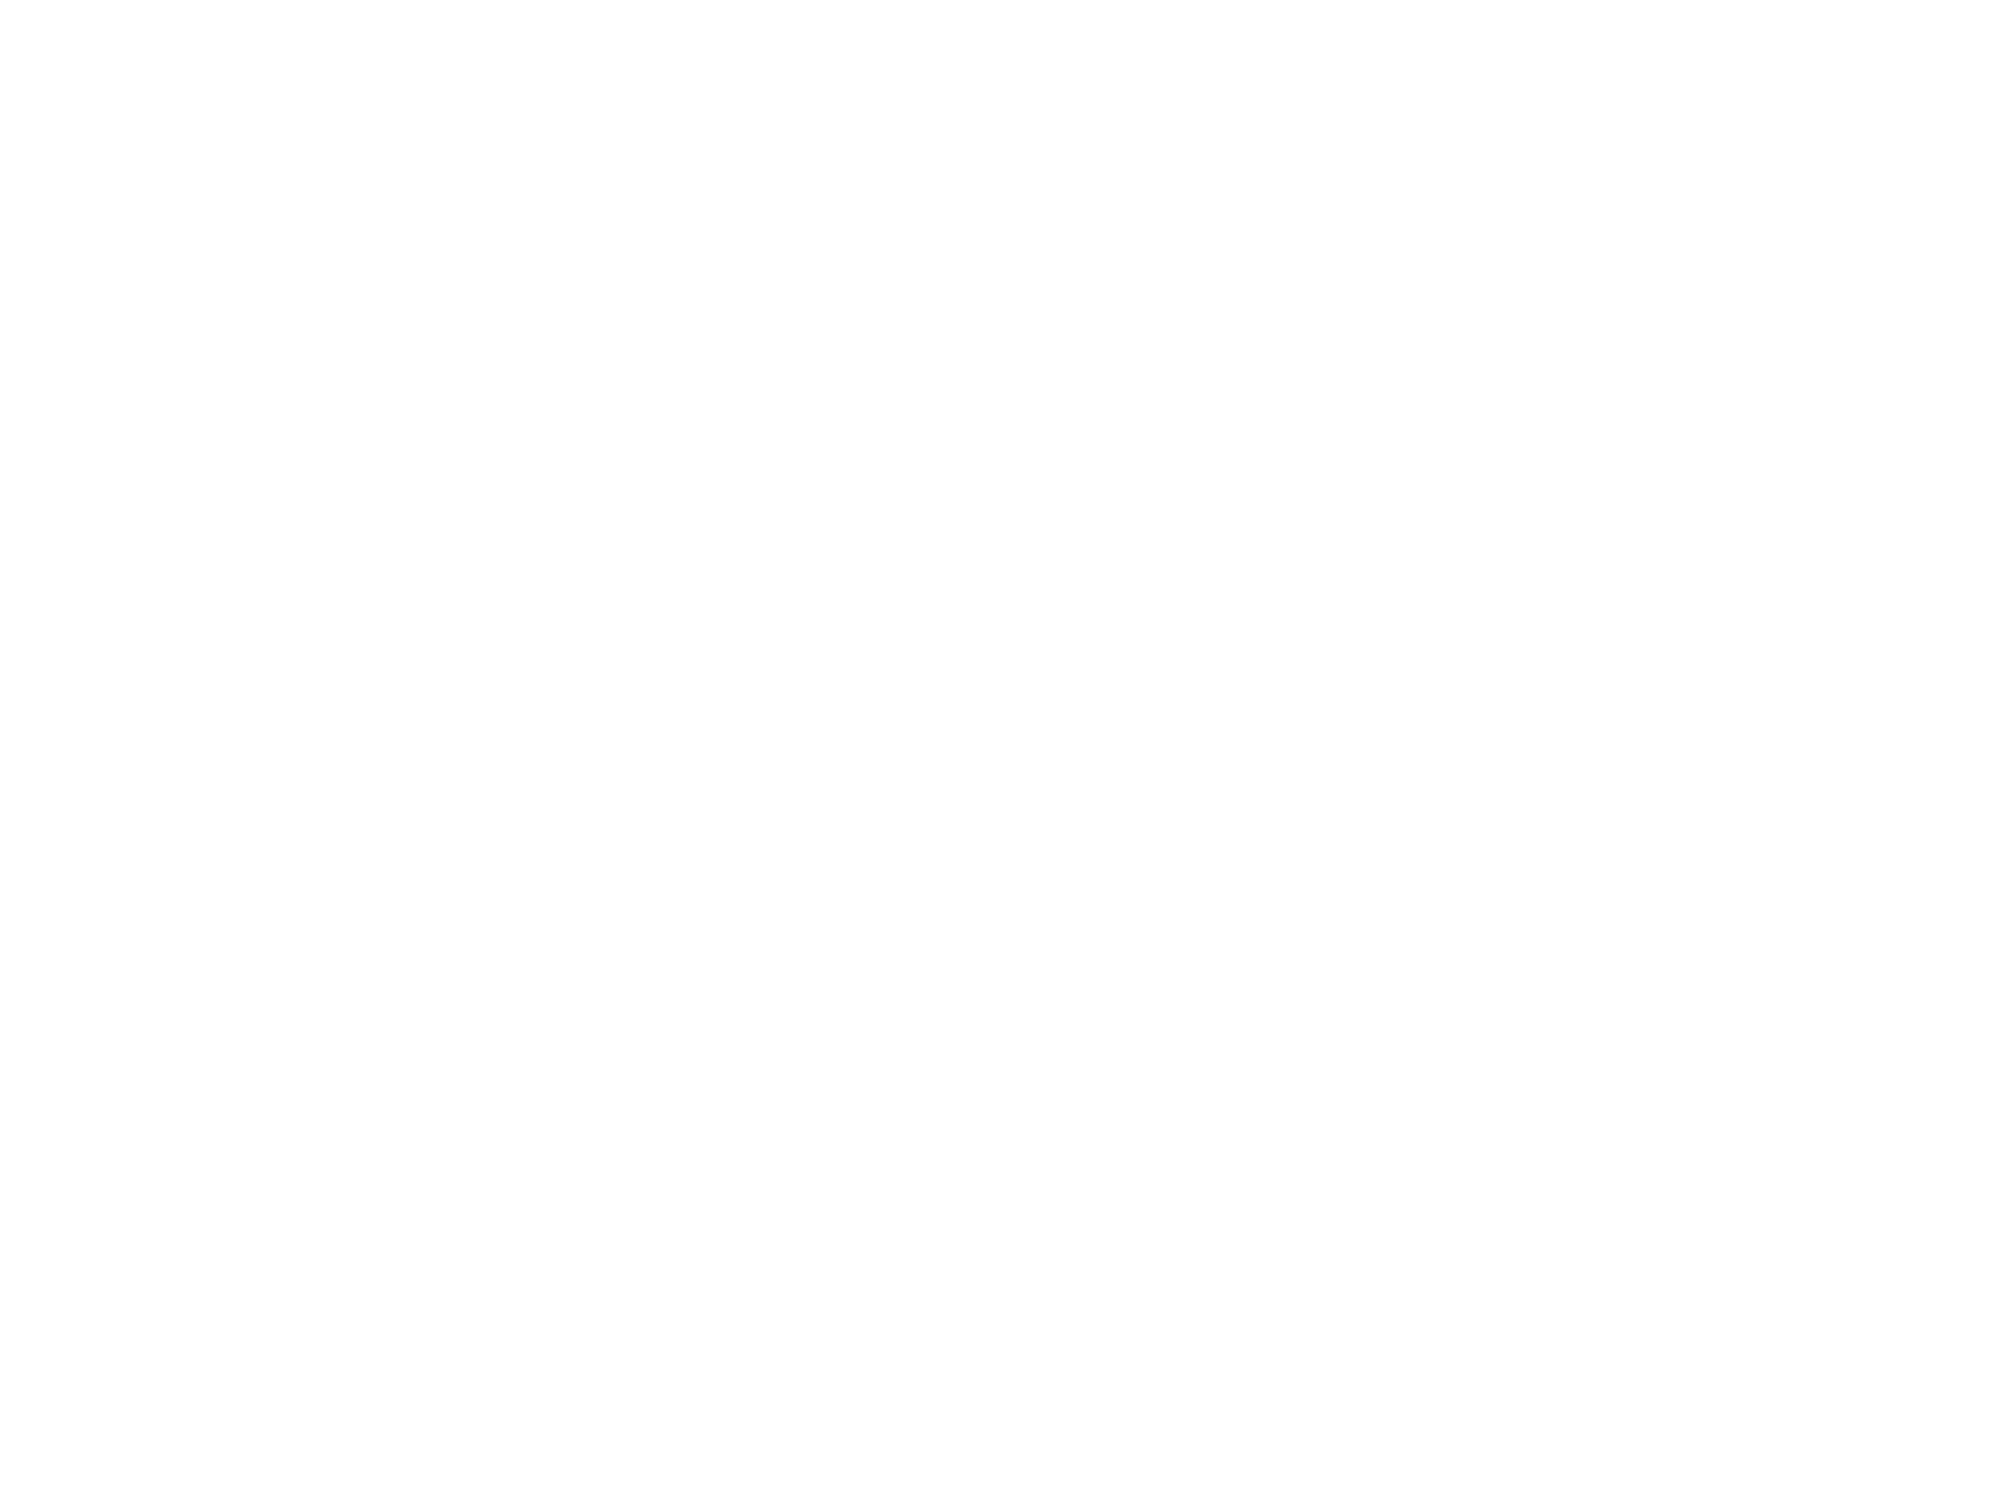 First Congregational Church of Minnesota logo in white